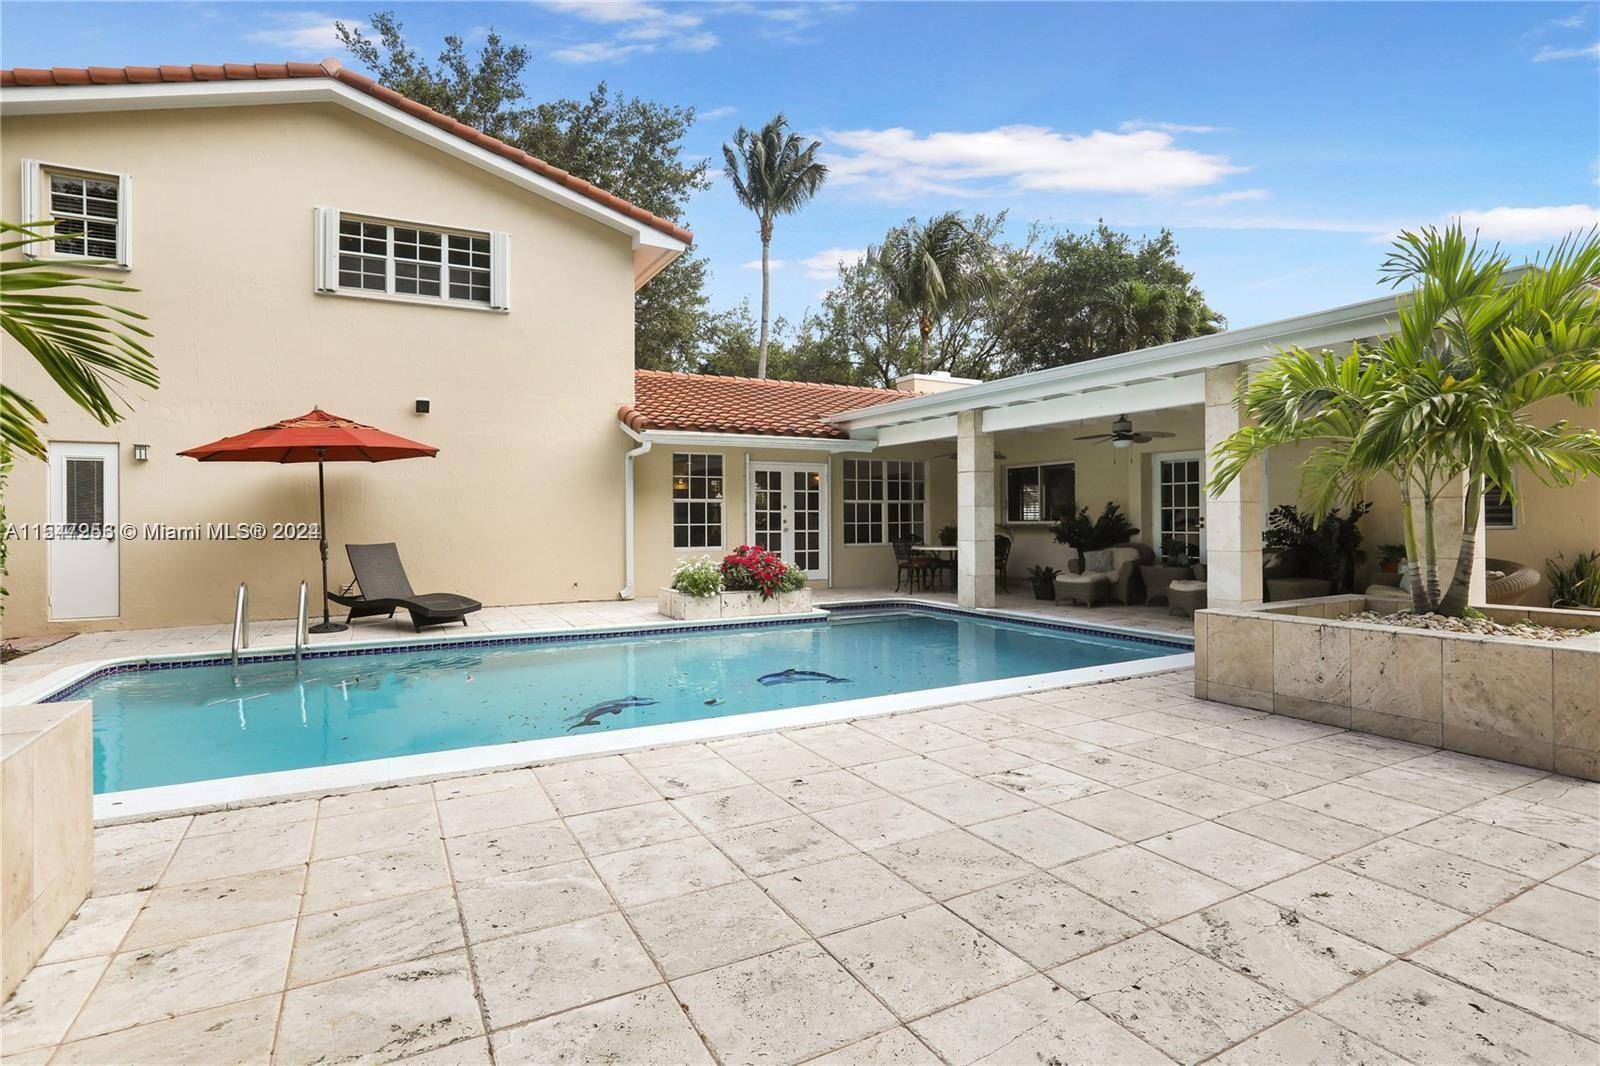 Exceptional 2 story pool house nestled in the prestigious neighborhood of Palmetto Bay.